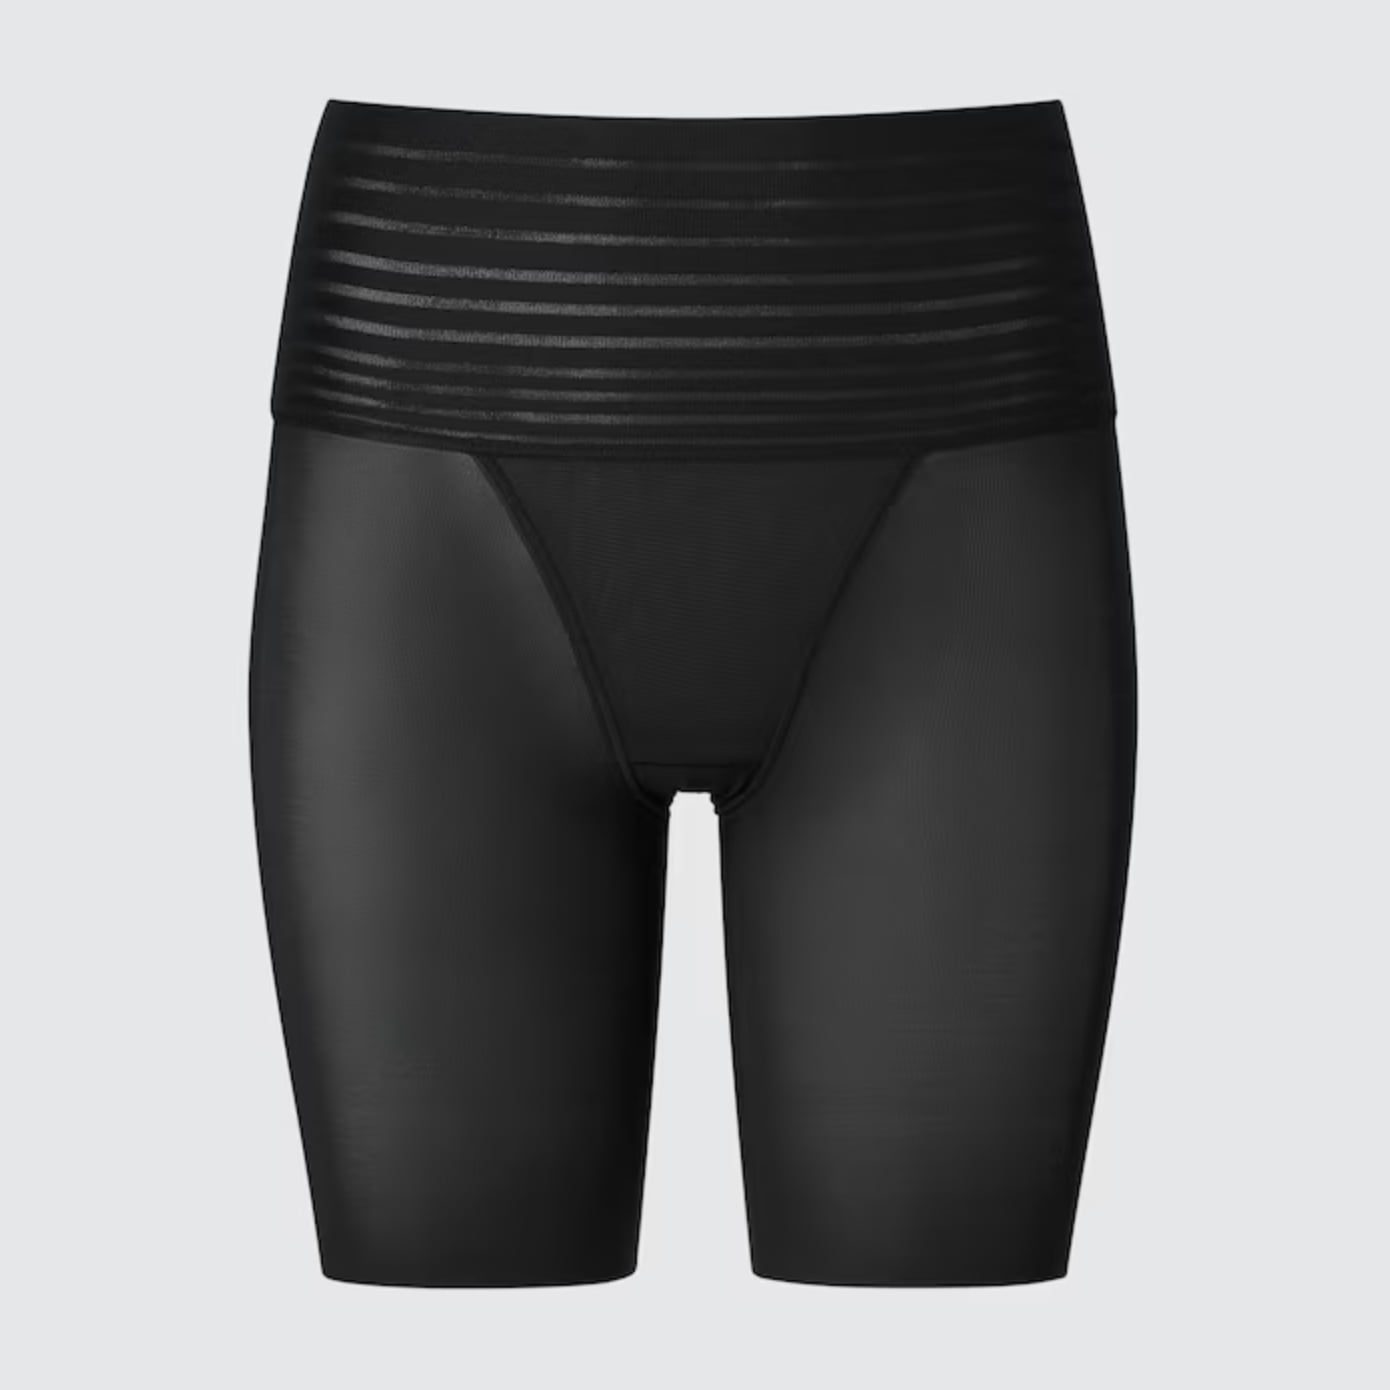 Uniqlo AIRism Smooth Body Shaper Unlined Half Shorts in Black ($15), TikTokers Say These $15 Uniqlo Shorts Are as Good as Skims Shapewear